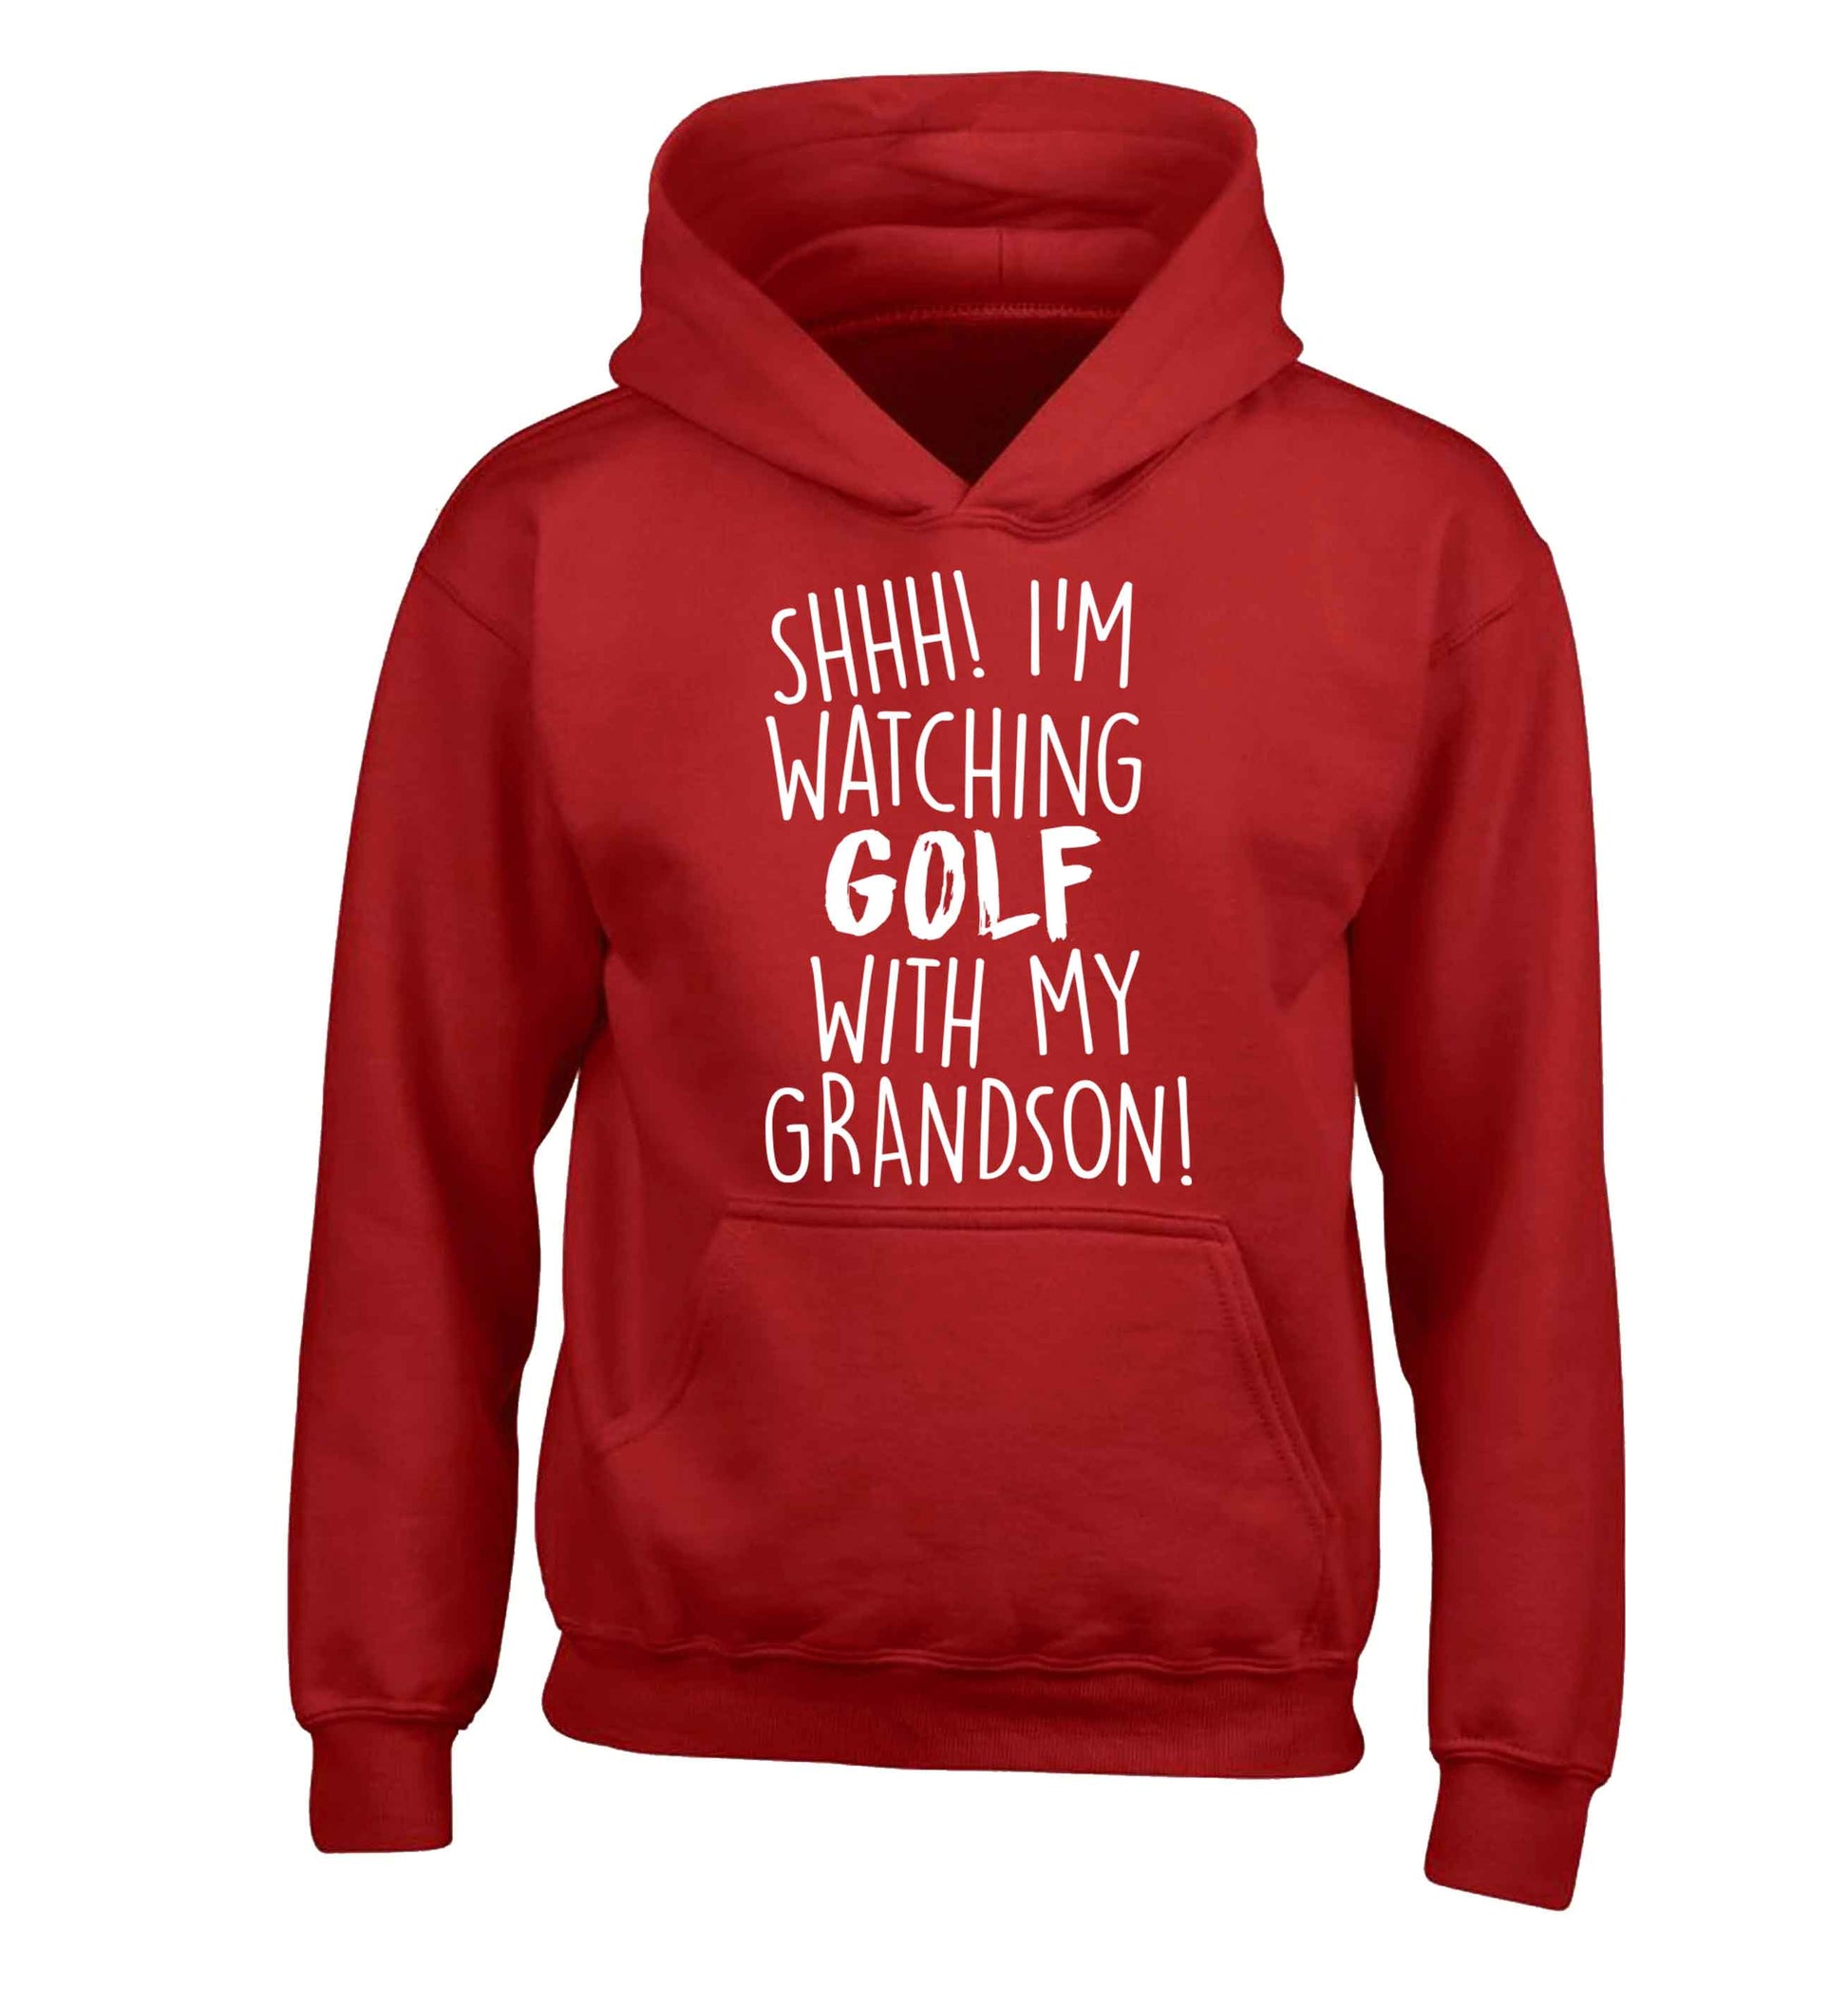 Shh I'm watching golf with my grandsonchildren's red hoodie 12-13 Years